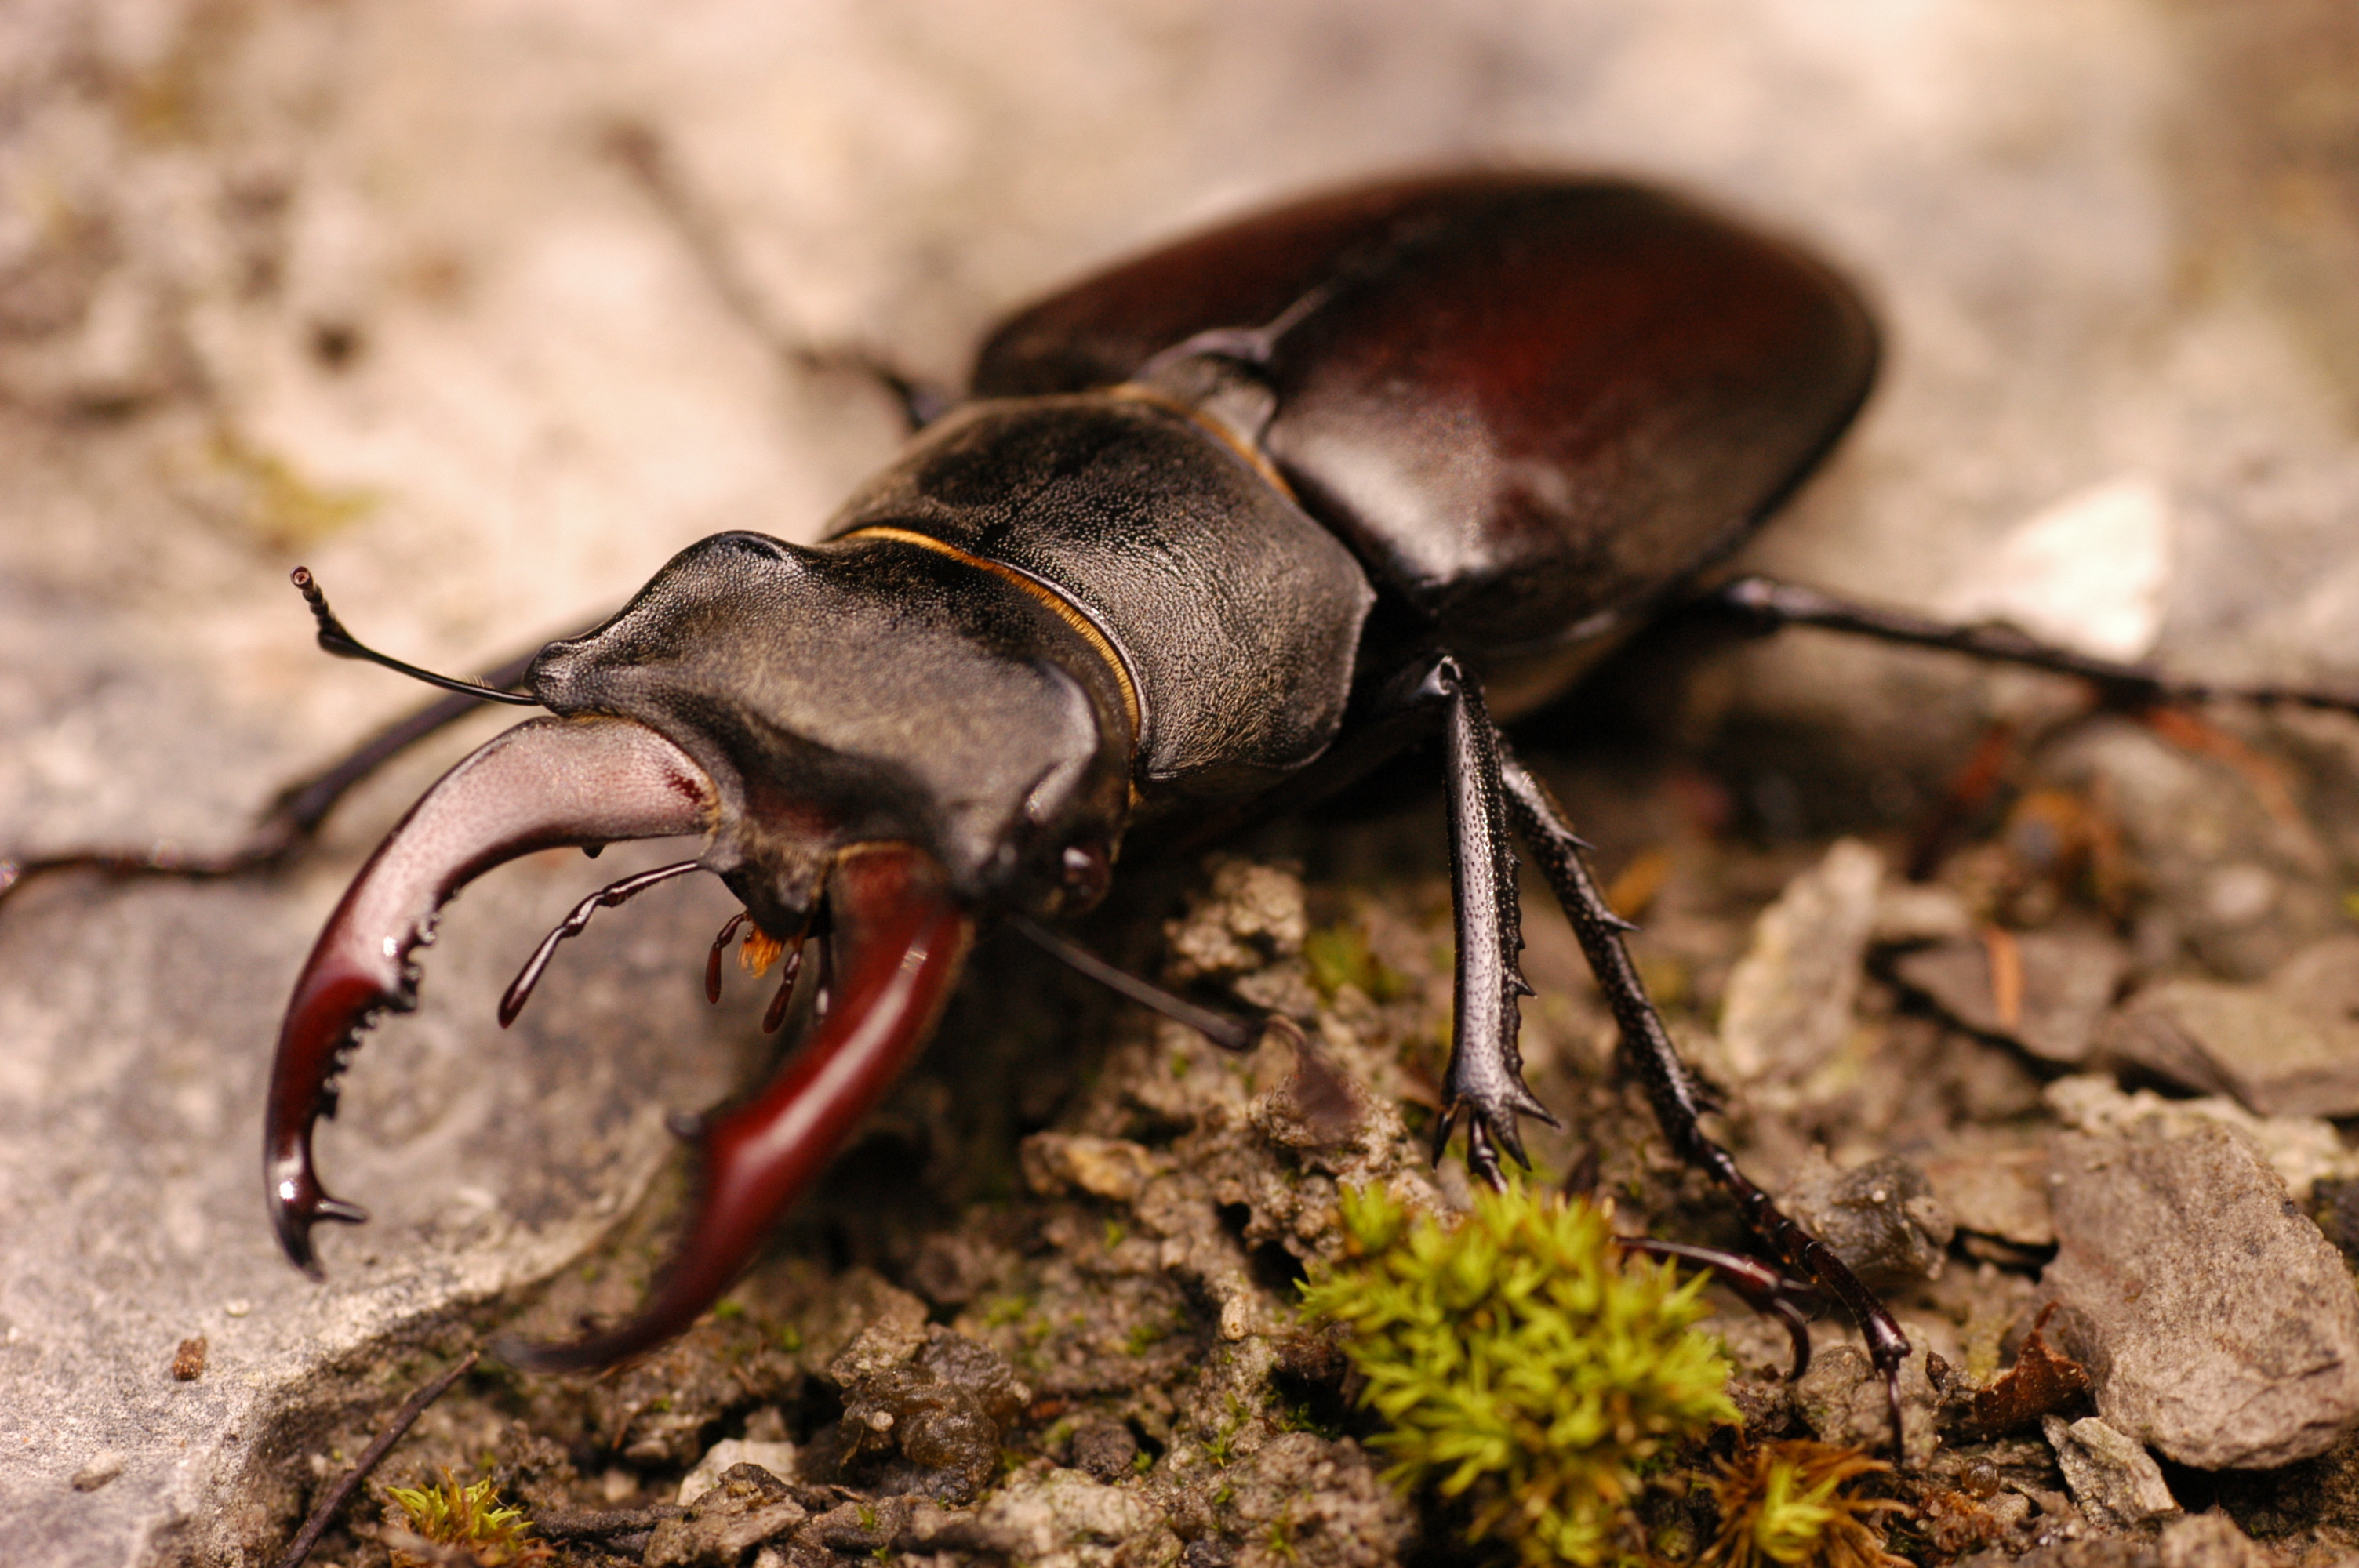 Beetle (Animals), Stag beetle close-up, Beetle wallpaper, Horned insect, 3010x2000 HD Desktop